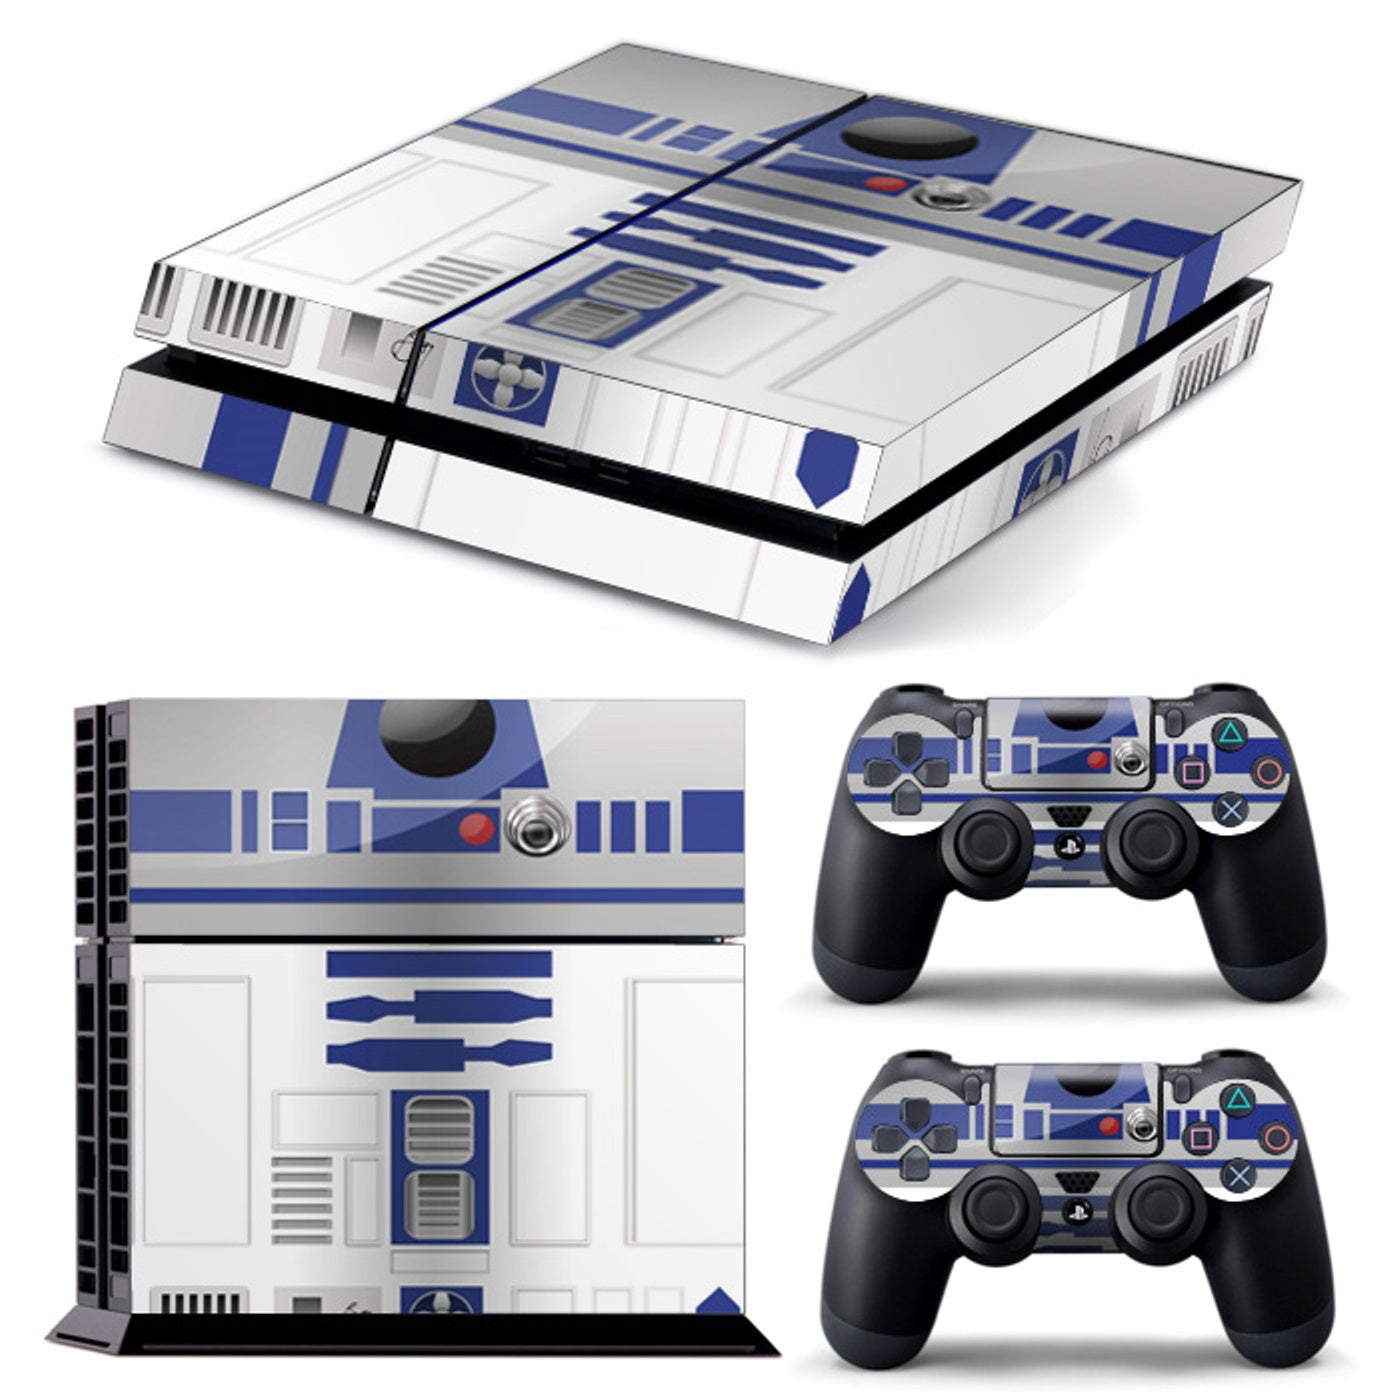 PS4 FULL BODY Accessory Wrap Sticker Skin Cover Decal for PS4 Playstation 4, ***R2-D2***